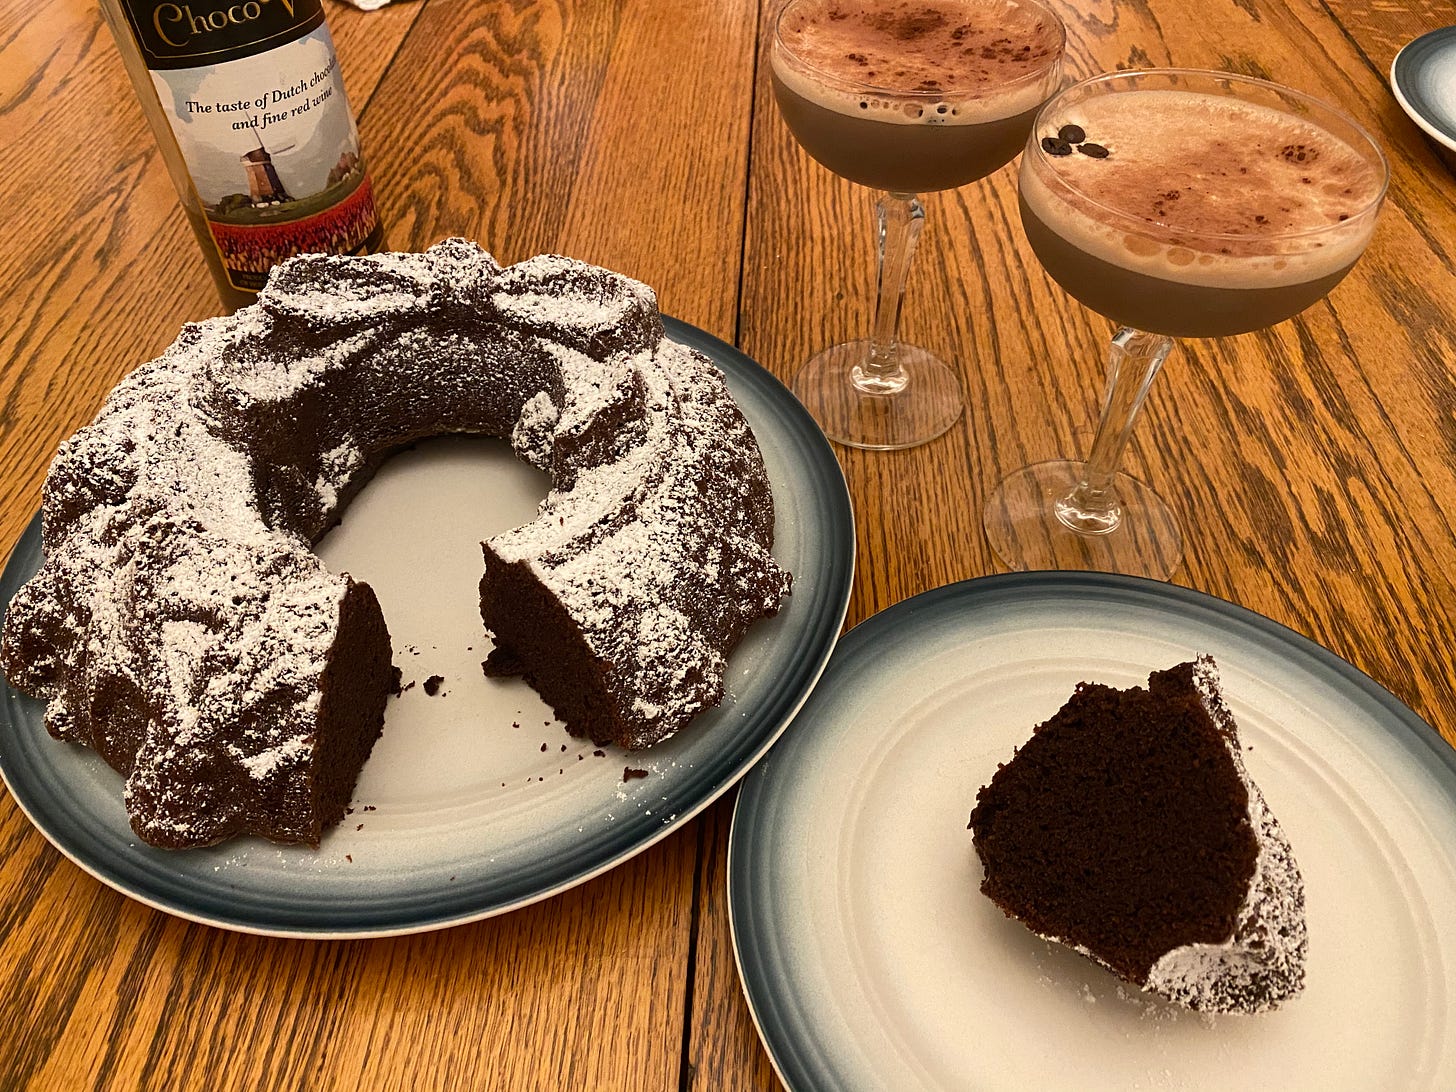 A deep brown chocolate bundt cake, dusted with powdered sugar, with one slice removed and plated nearby. Two espresso martinis in coupe glasses are in the background. 